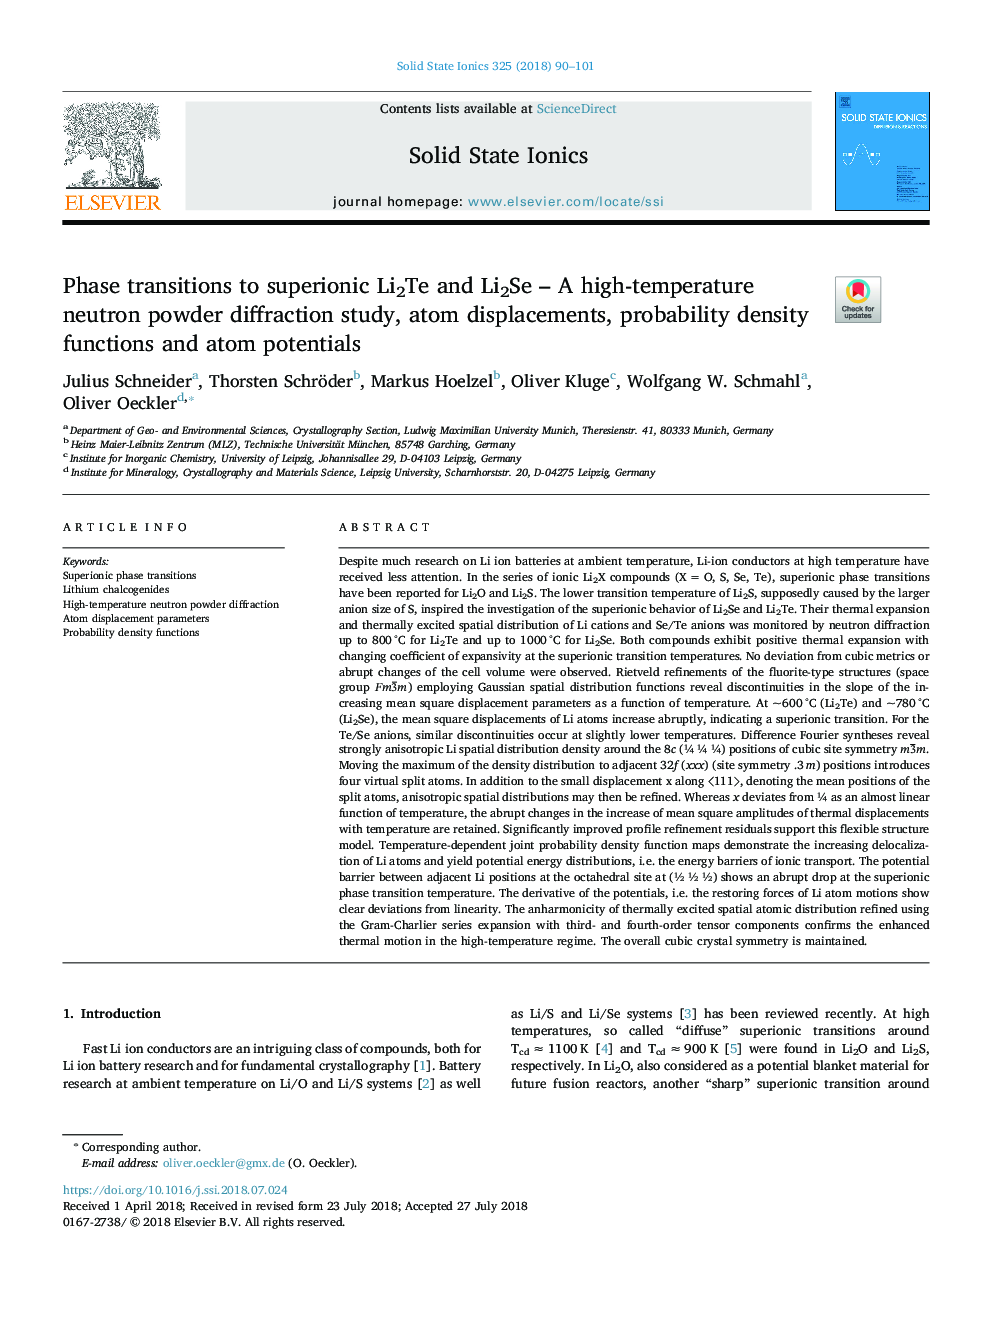 Phase transitions to superionic Li2Te and Li2Se - A high-temperature neutron powder diffraction study, atom displacements, probability density functions and atom potentials